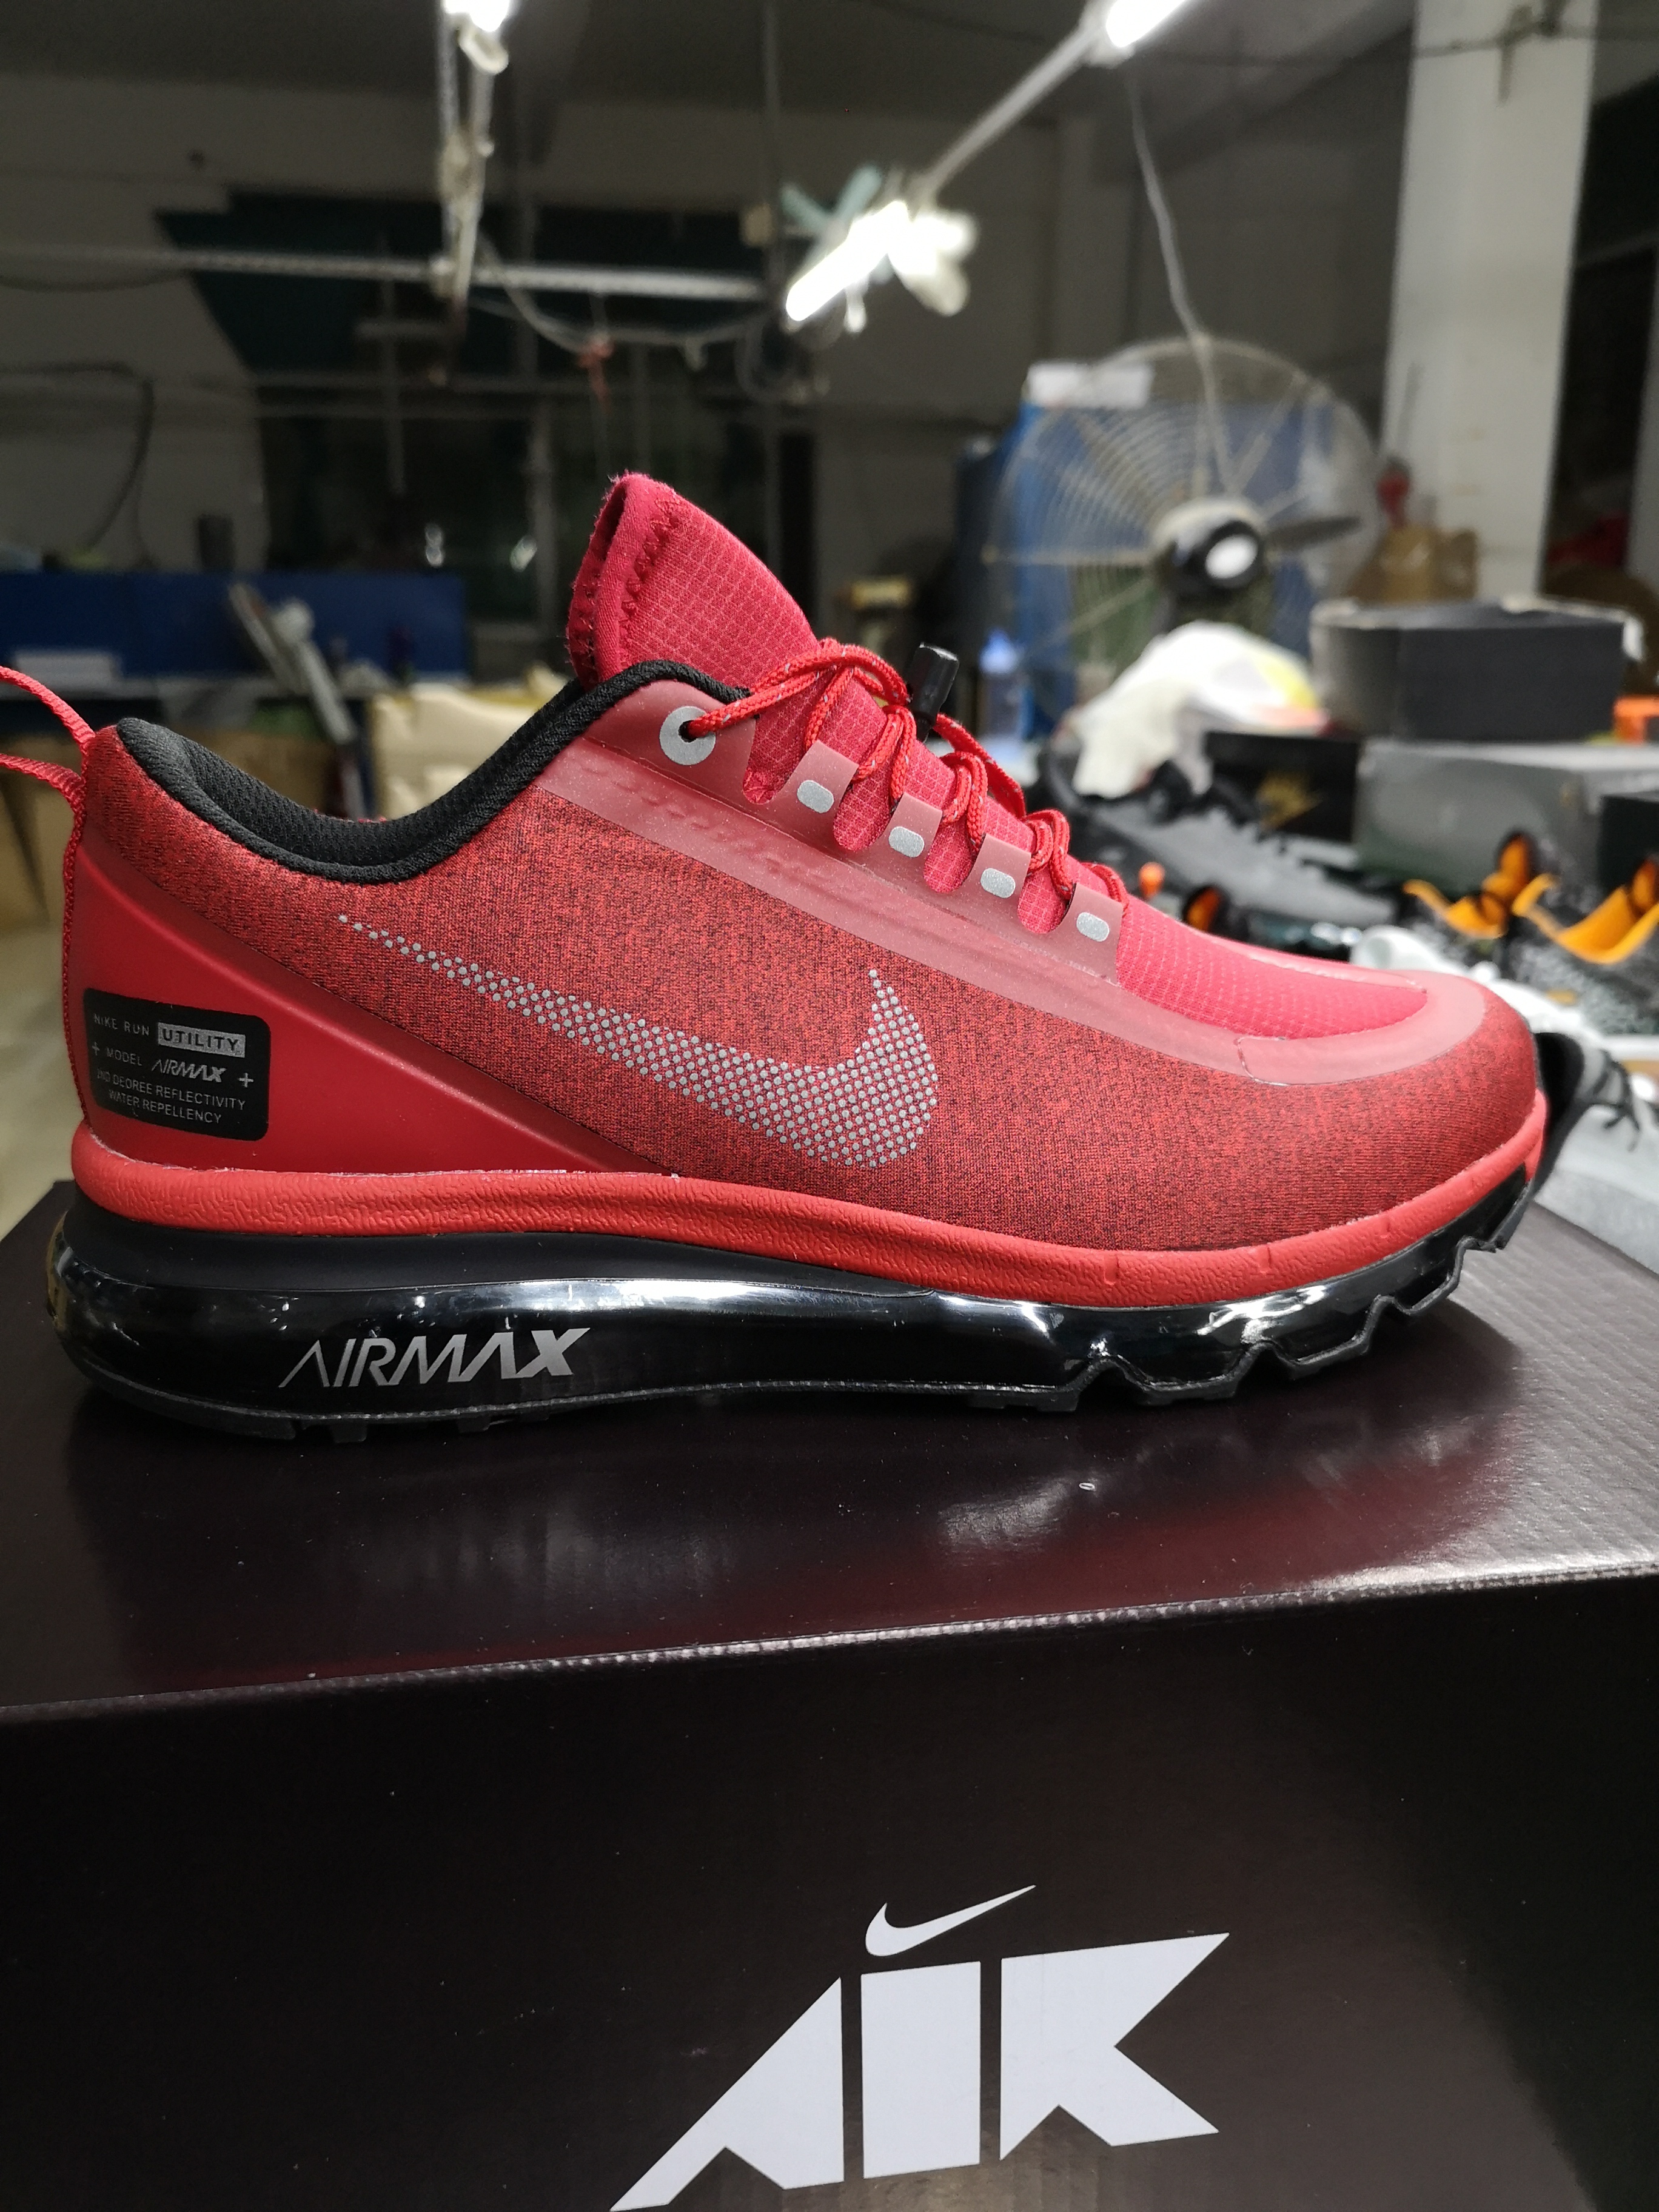 Nike Air Max 2017 Waterproof Red Black Shoes - Click Image to Close